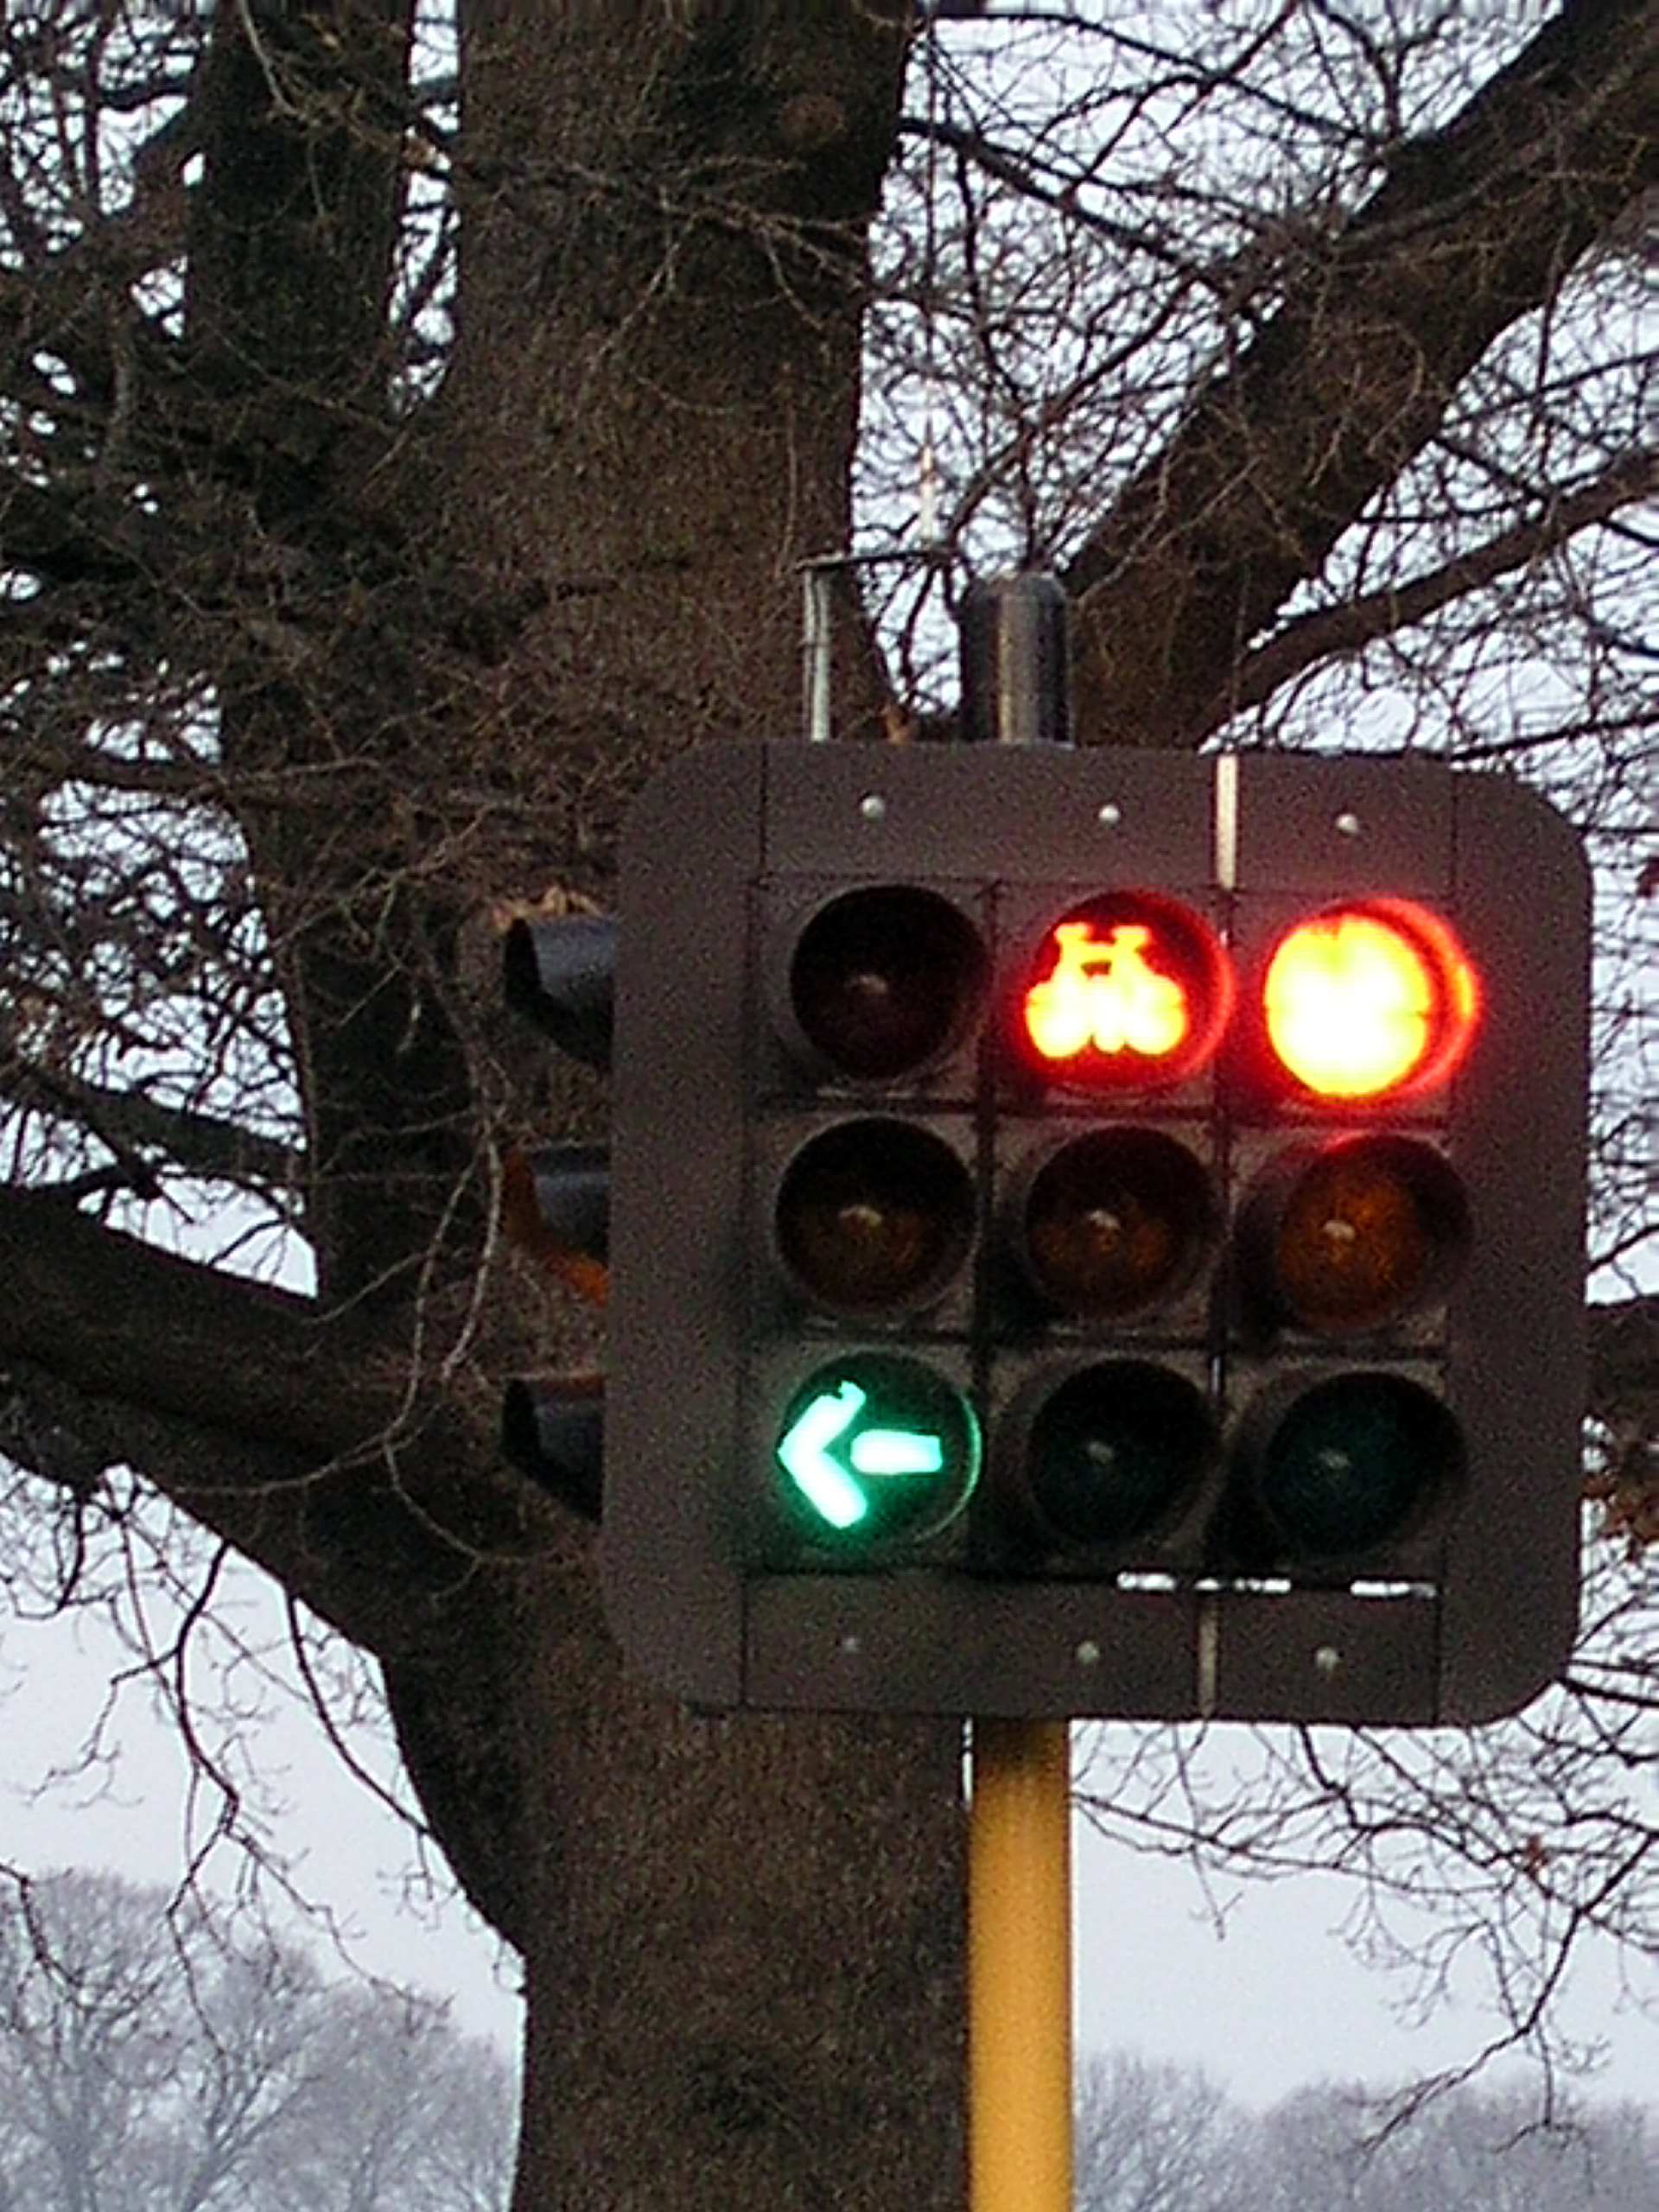 Three traffic lights with the left turn green and the two others red.